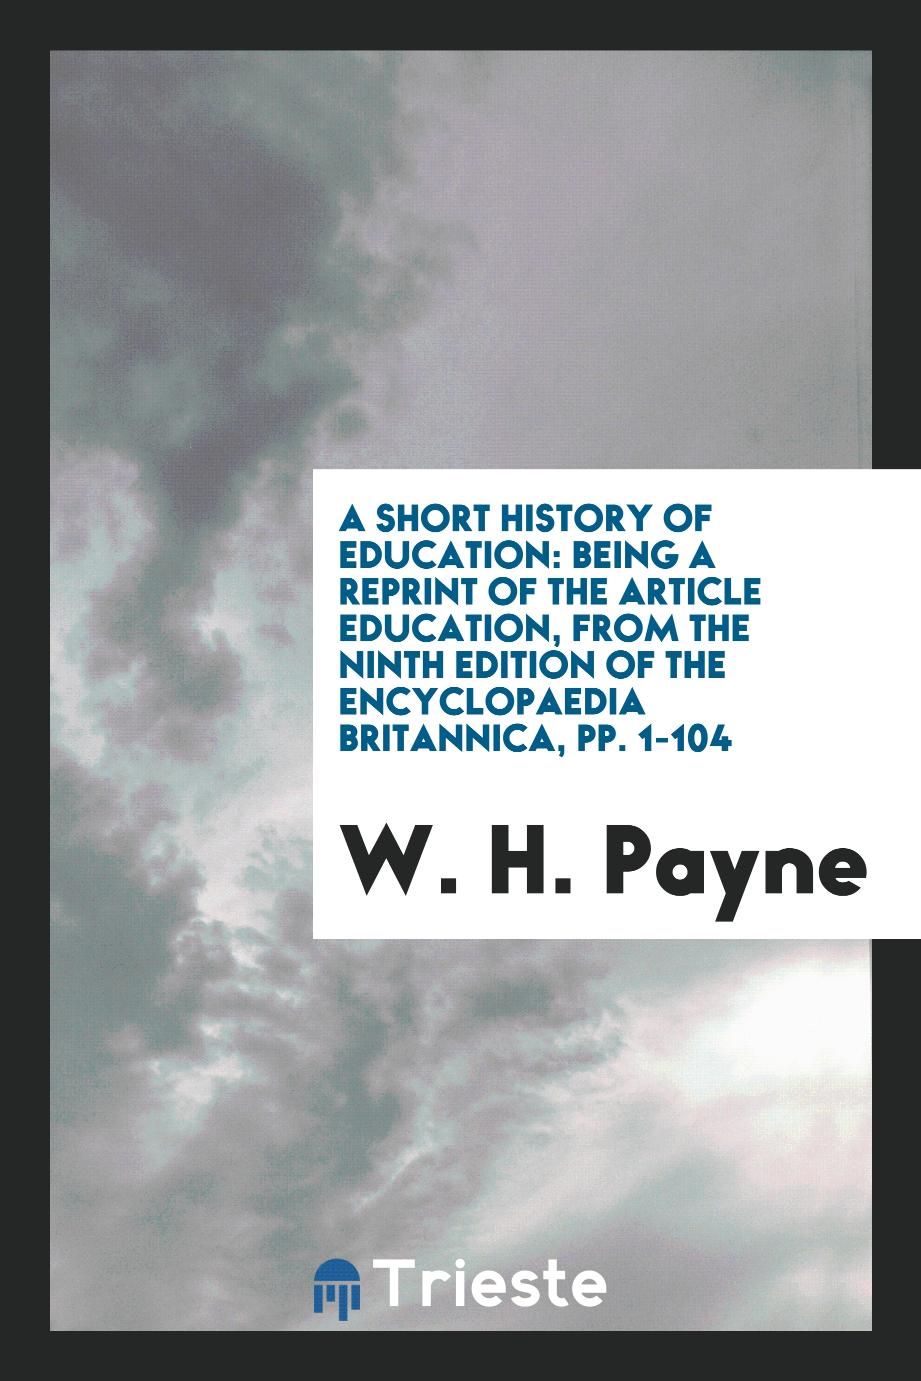 A Short History of Education: Being a Reprint of the Article Education, from the Ninth Edition of the Encyclopaedia Britannica, pp. 1-104